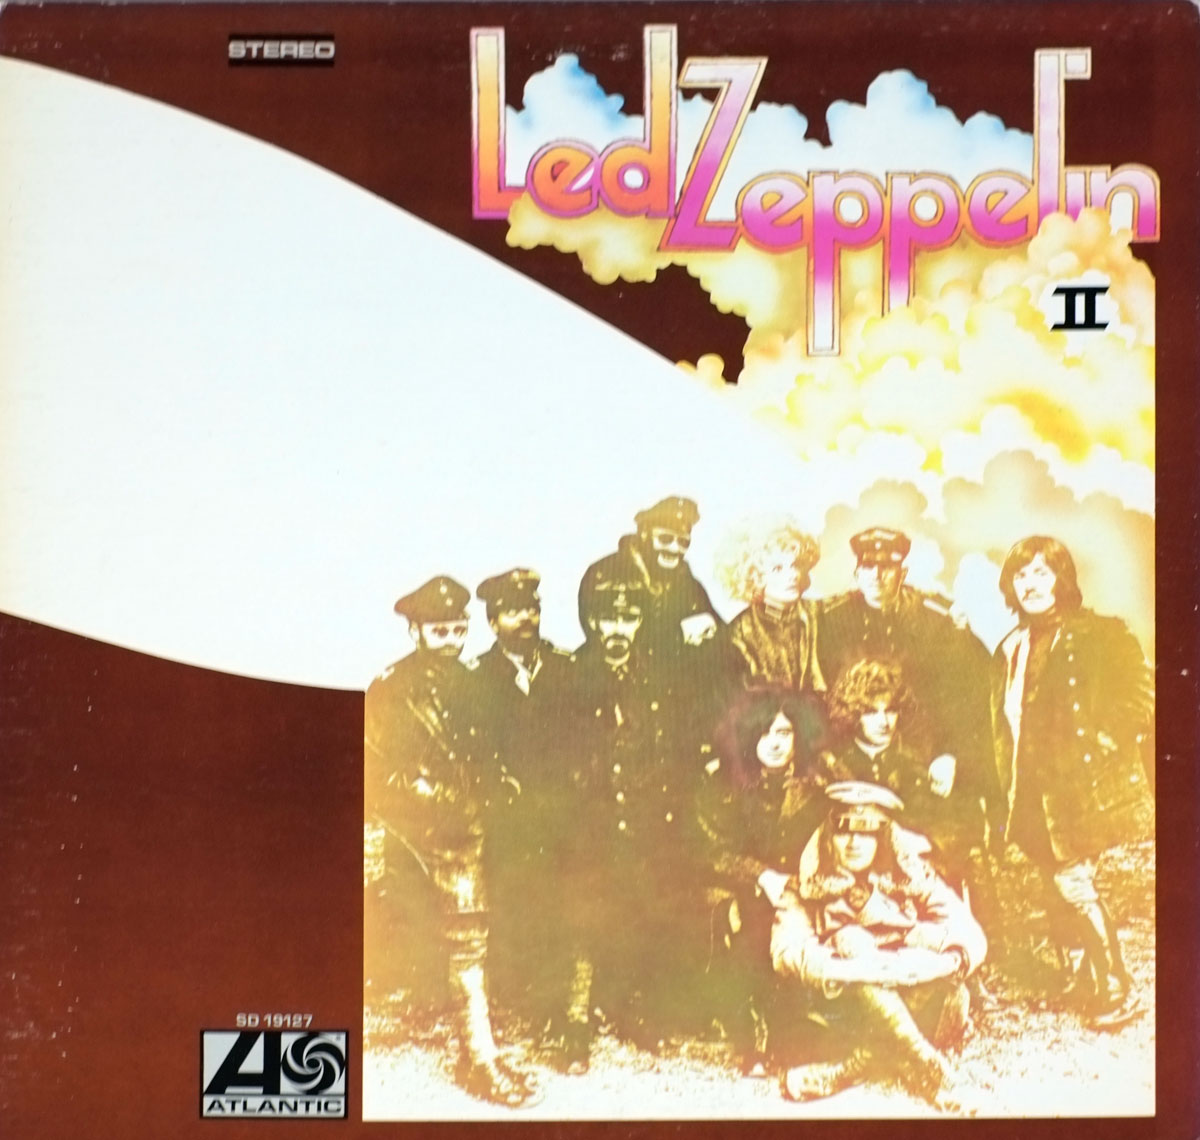 High Resolution Photo of Led Zeppelin II LP in Gatefold Cover 